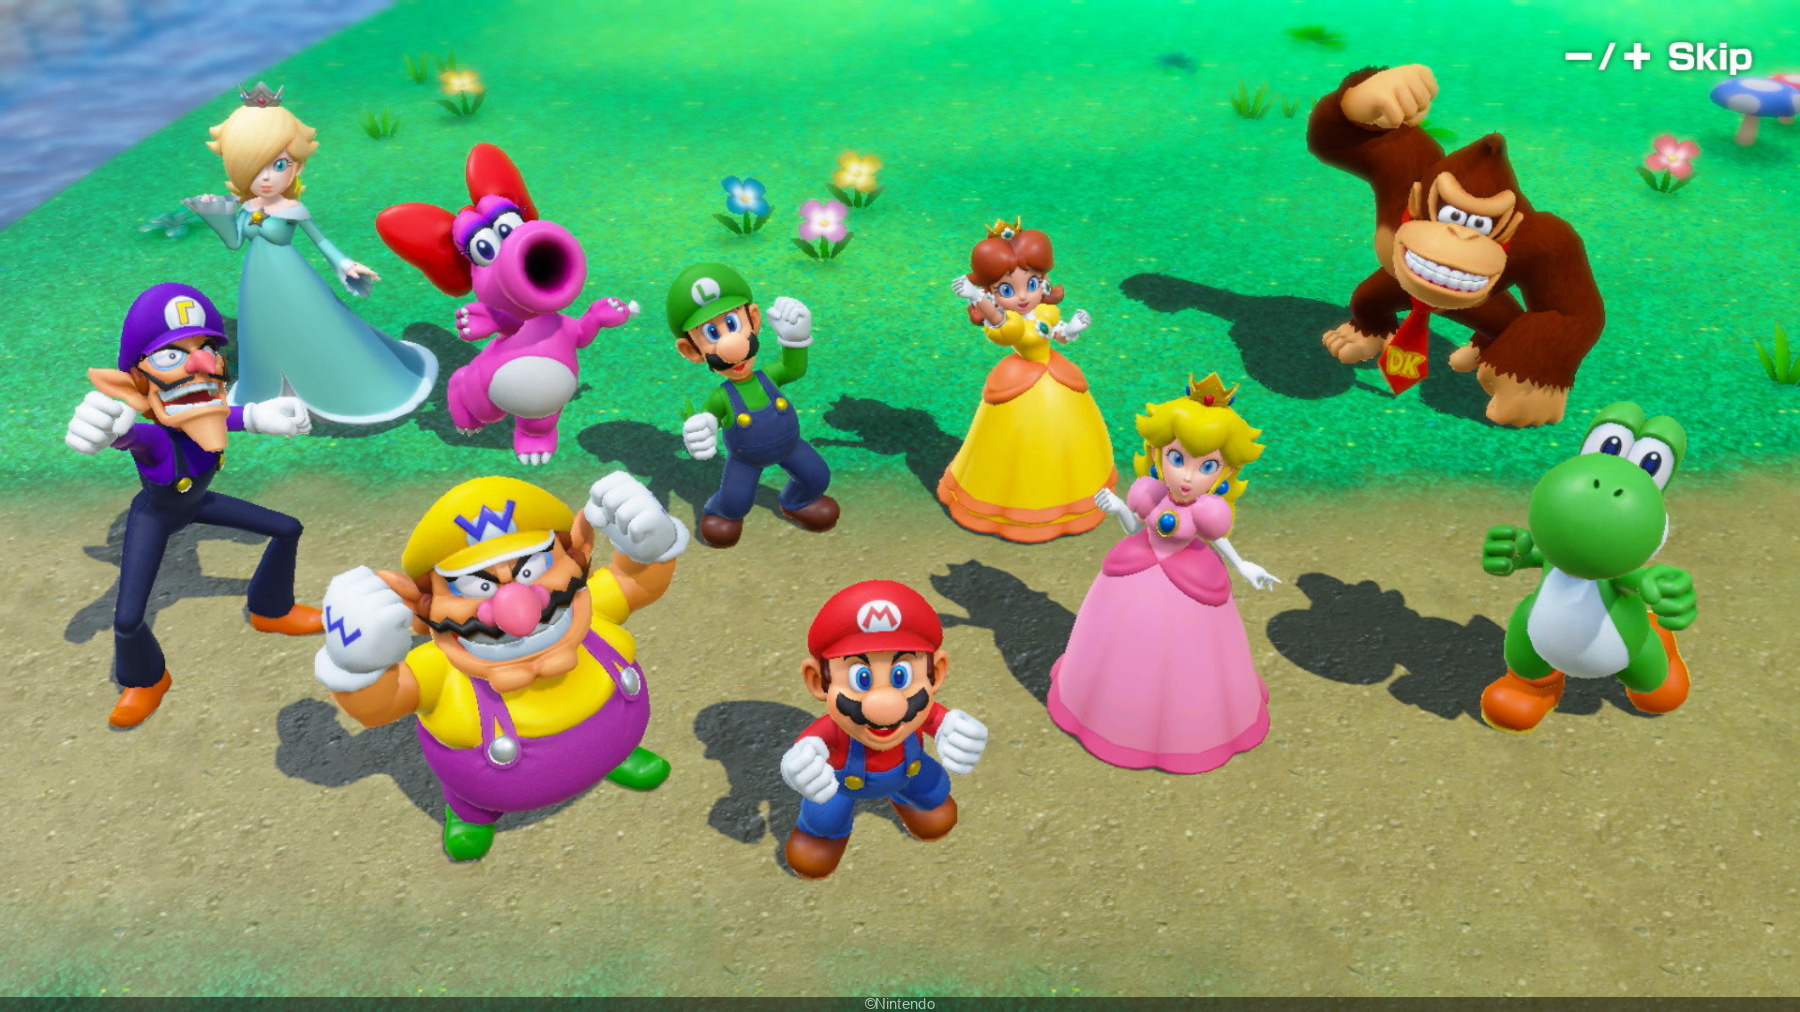 mario party switch game